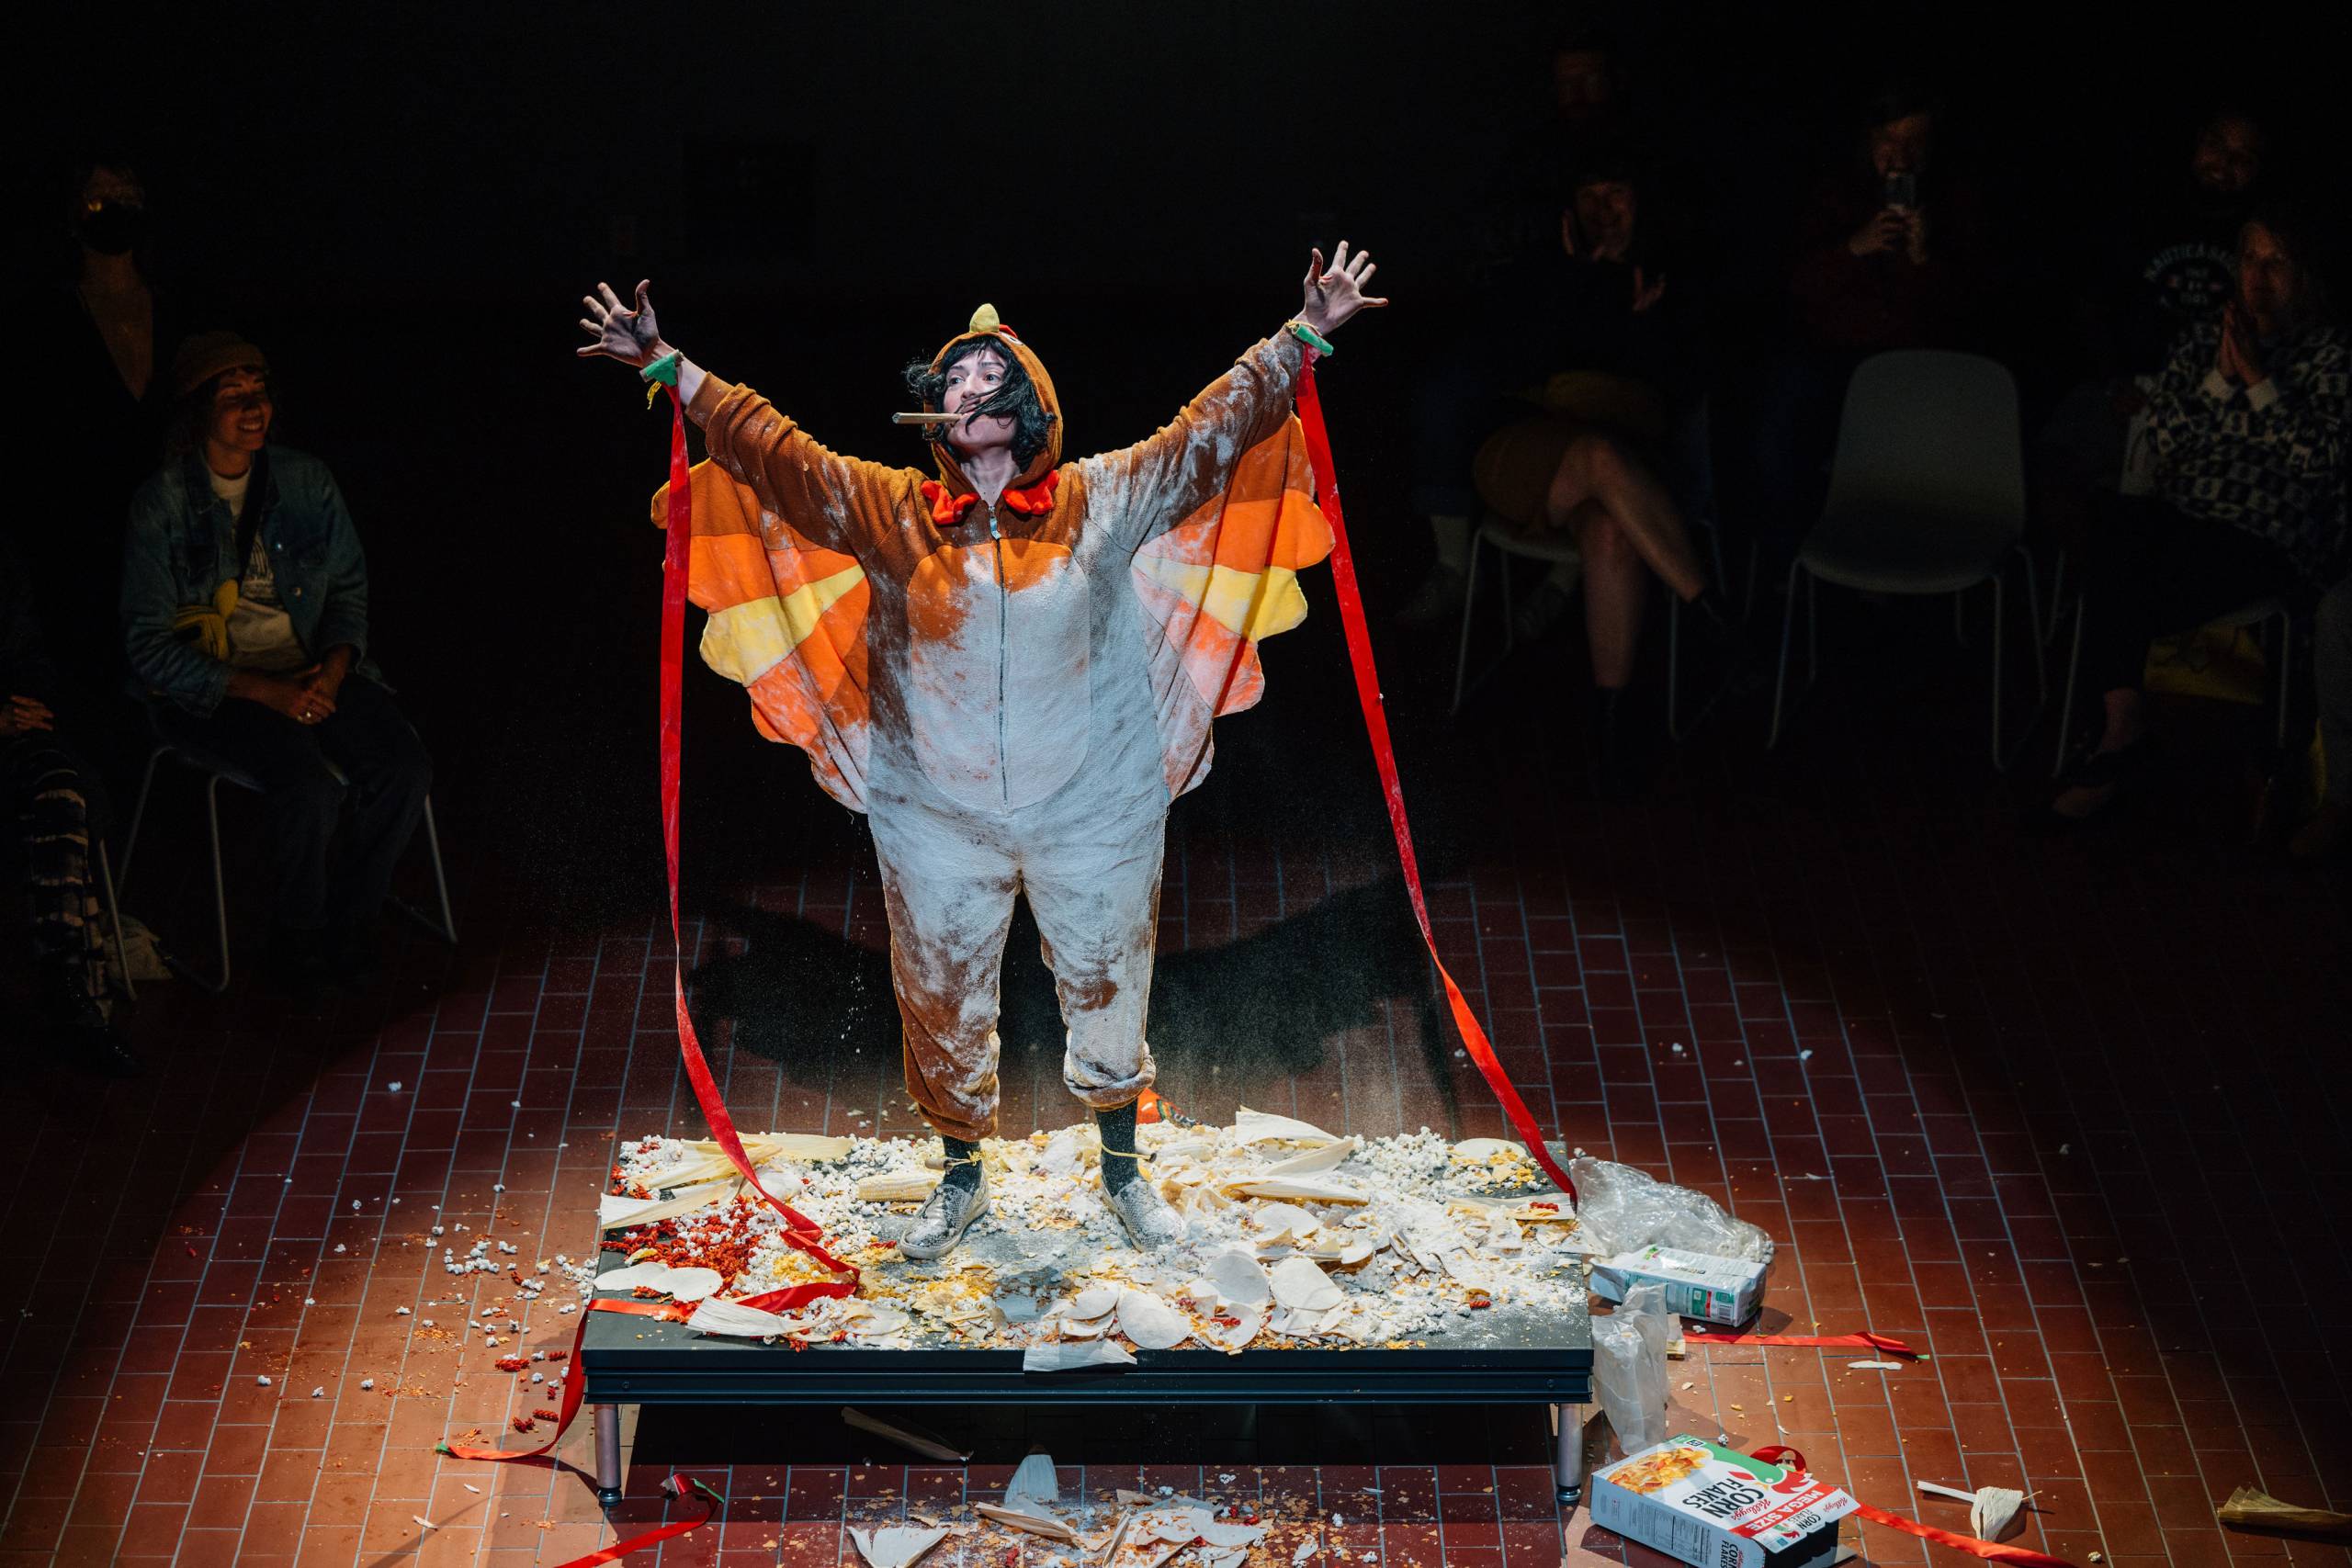 Artist Adriana Chavez stands on a small stage in a colorful chicken costume with her arms raised and a cigar in her mouth. Surrounding her are crushed corn chips, trash, and the remains of multiple Corn Flakes cereal boxes. Around her, just outside of the spotlight, sit audience members who are smiling and laughing.